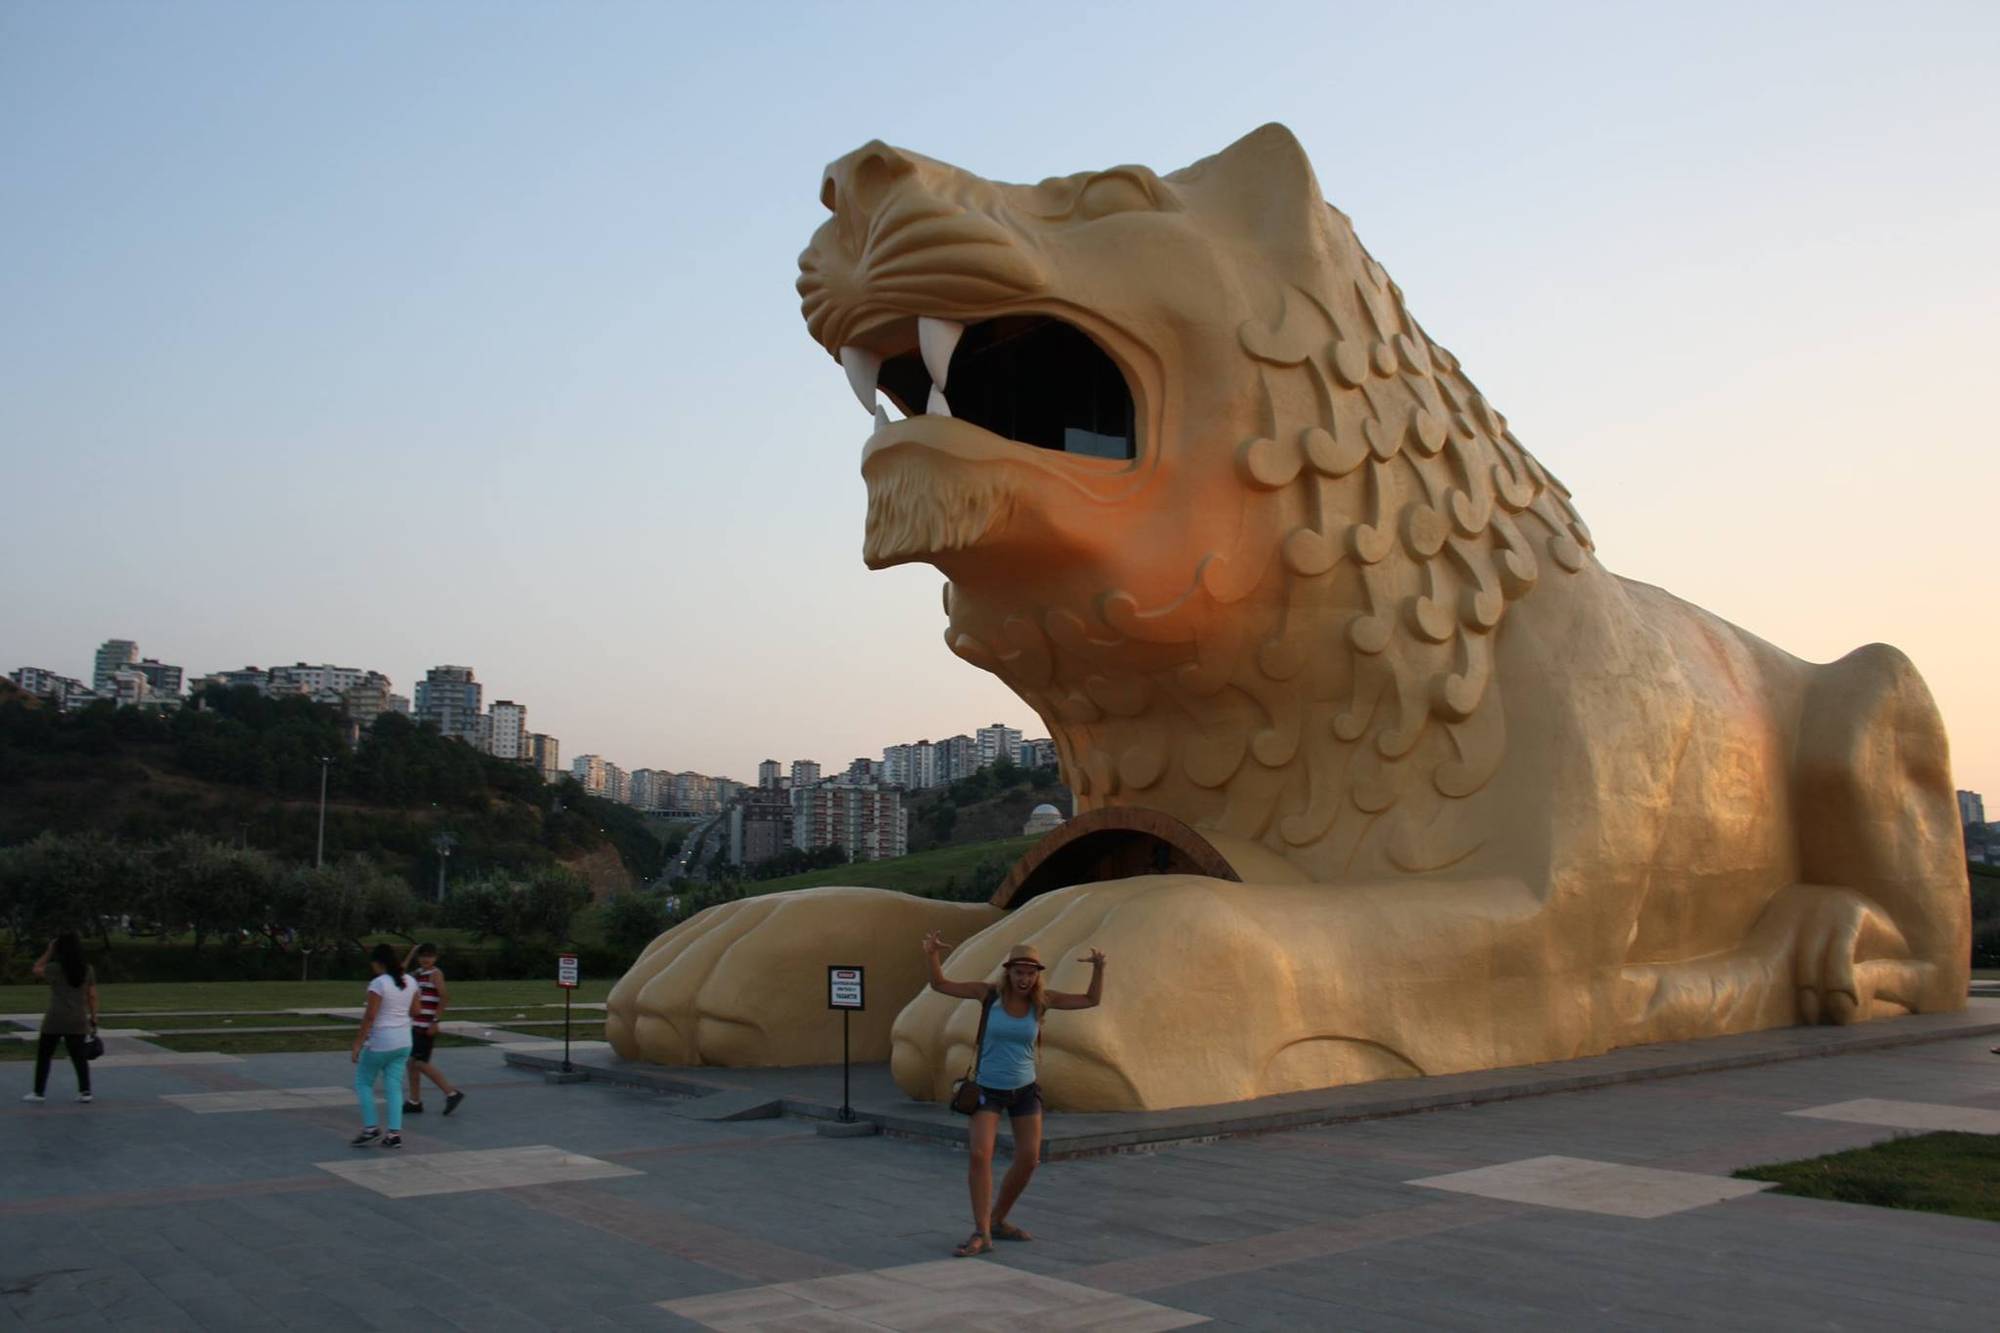 Samsun Anatolian Lion is an 11-meter-high museum depicting the presumed life of Amazon warriors